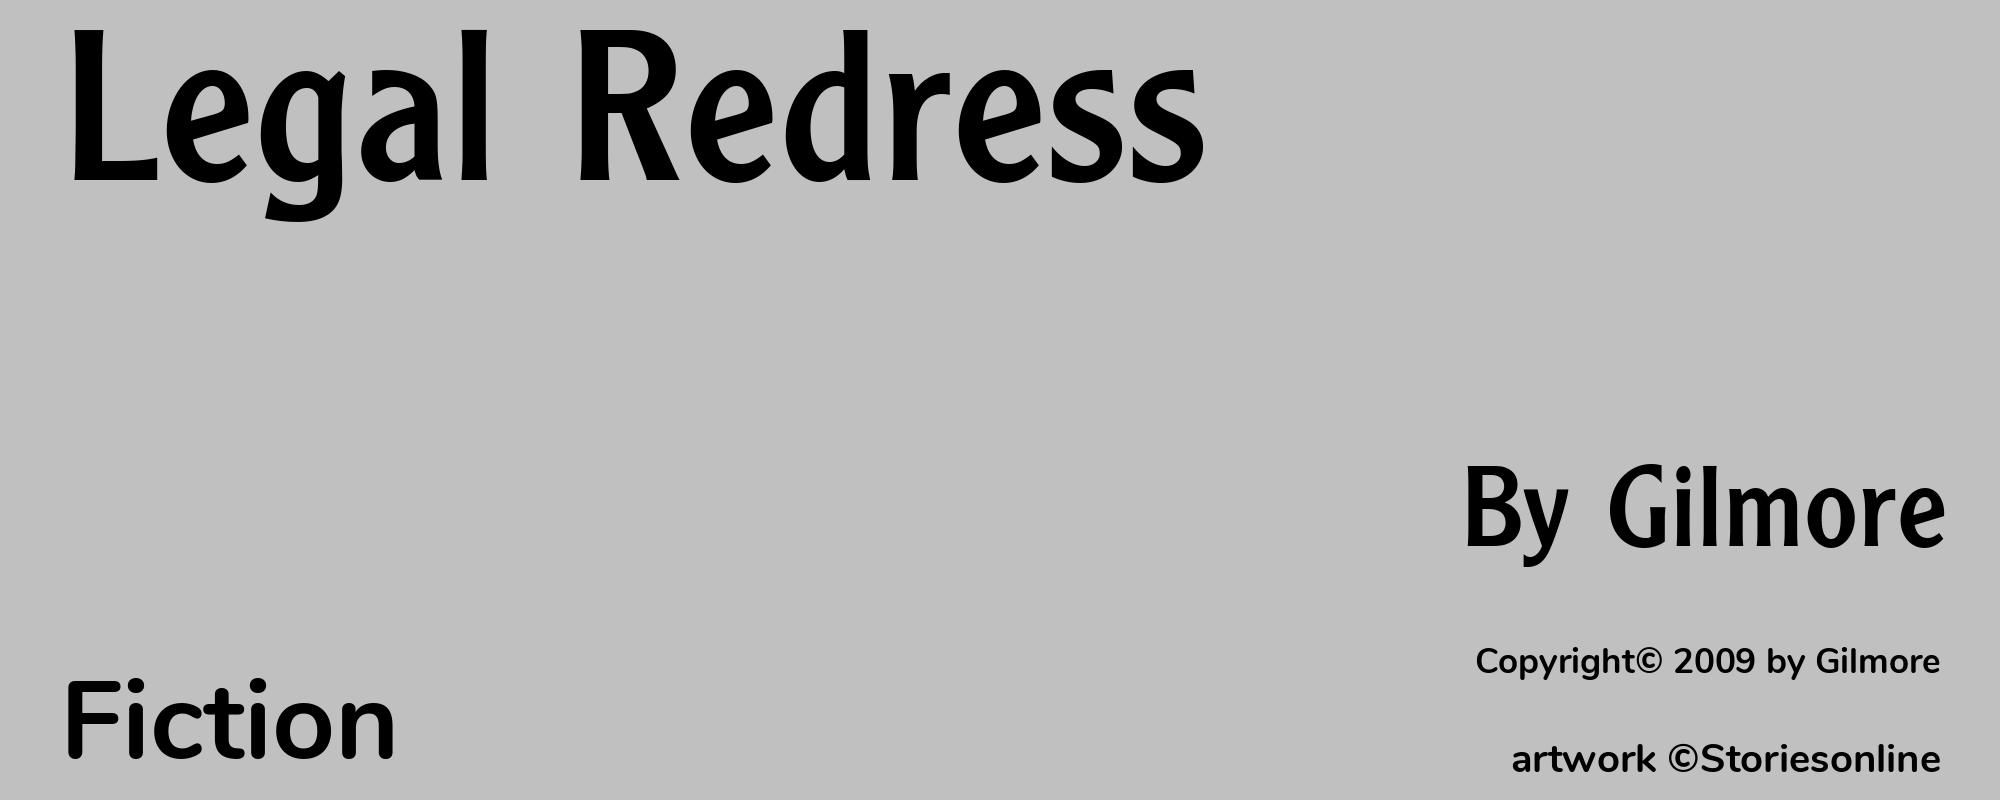 Legal Redress - Cover